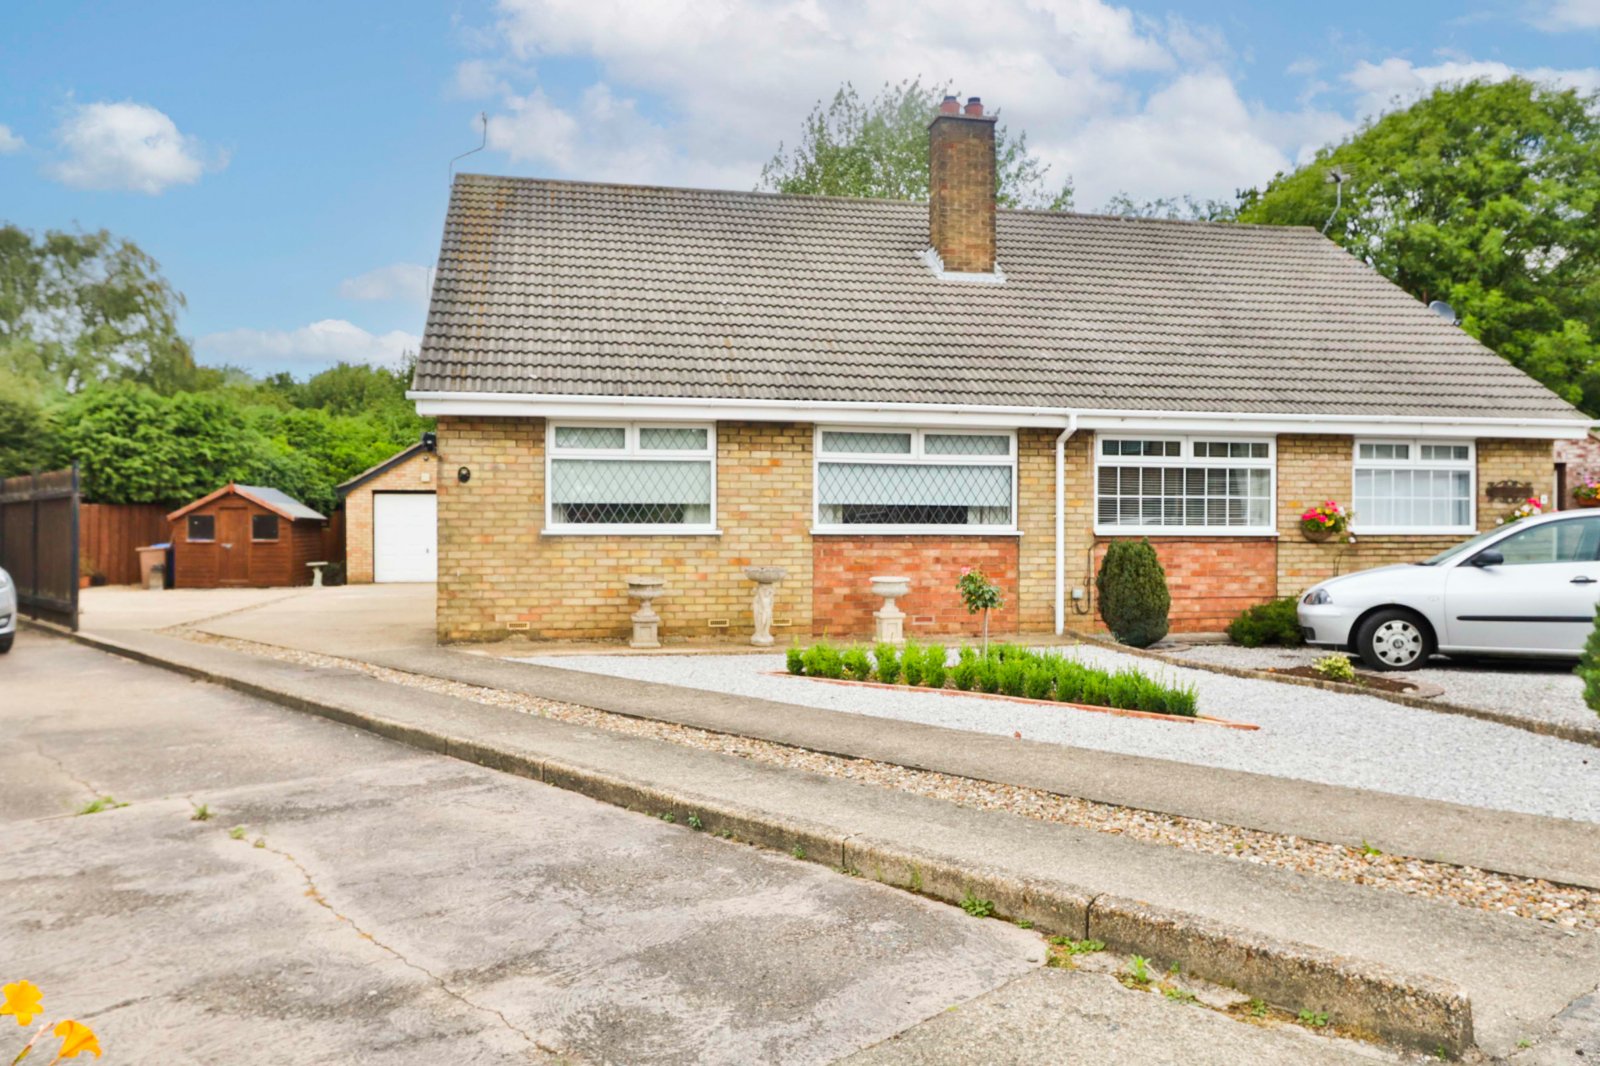 2 bed bungalow for sale in Warn Avenue, Hedon, HU12